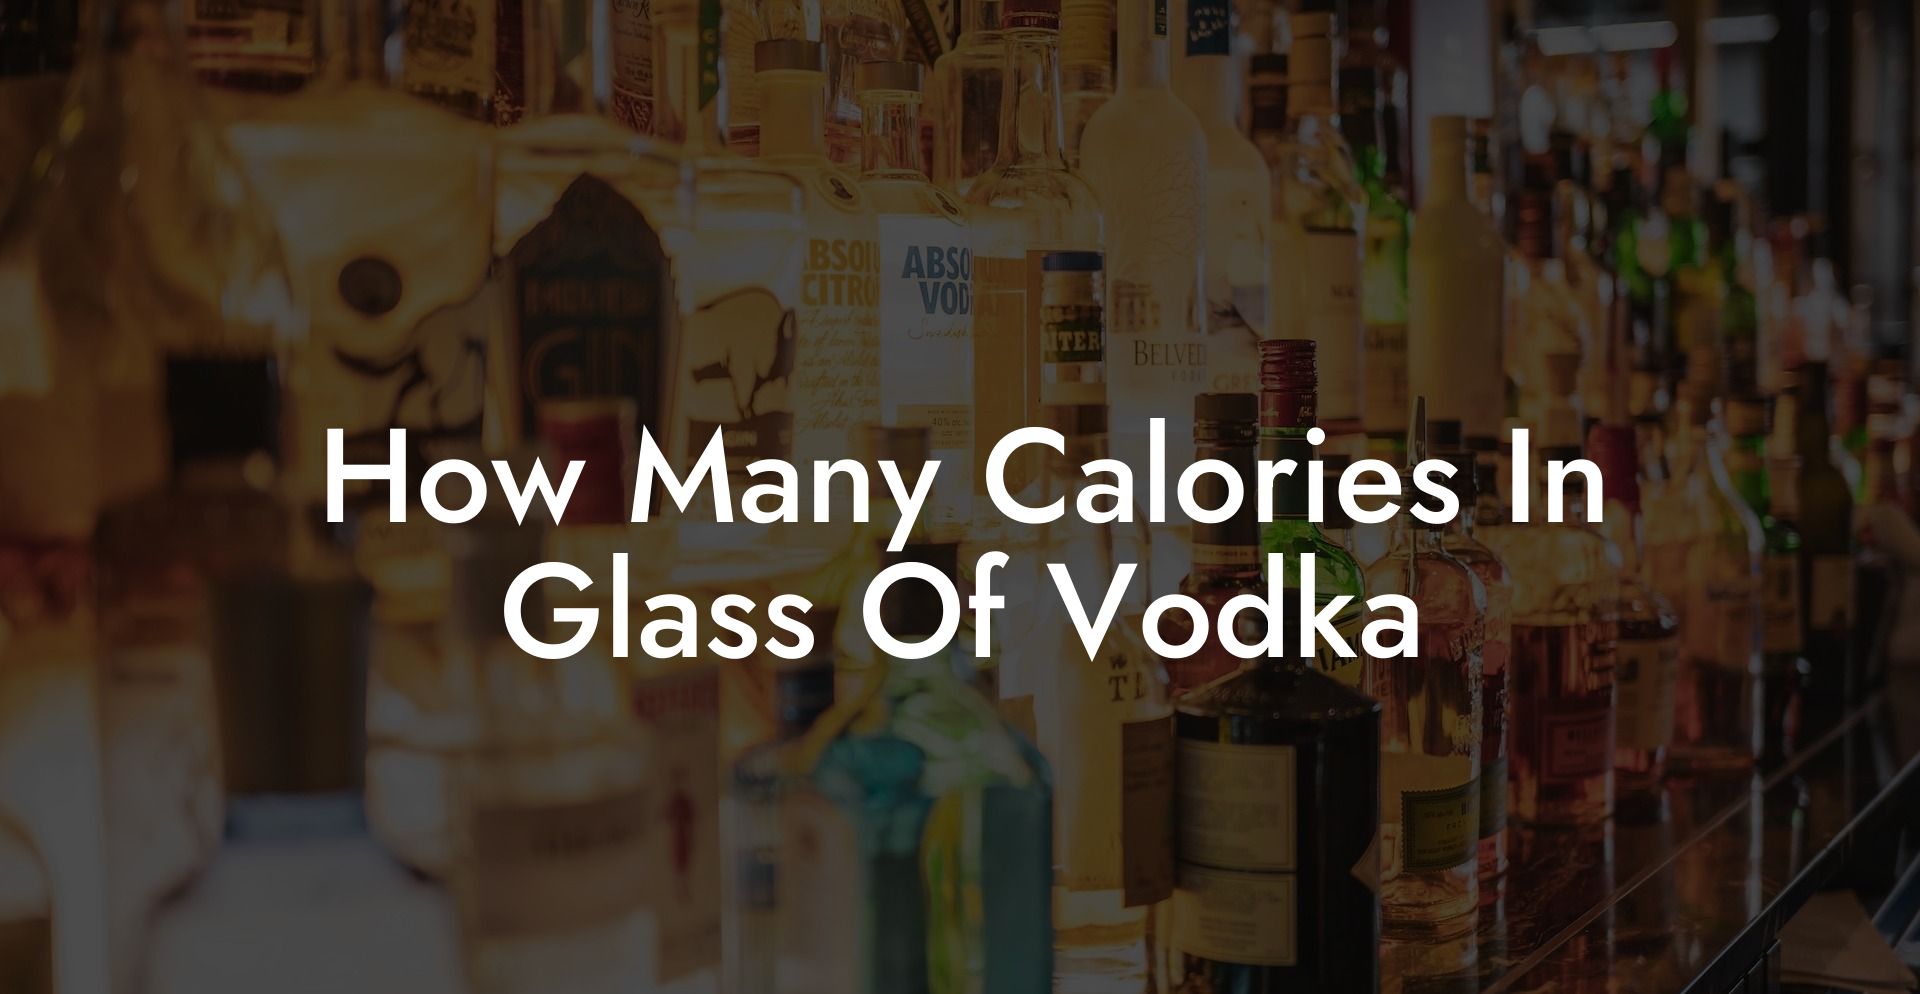 How Many Calories In Glass Of Vodka